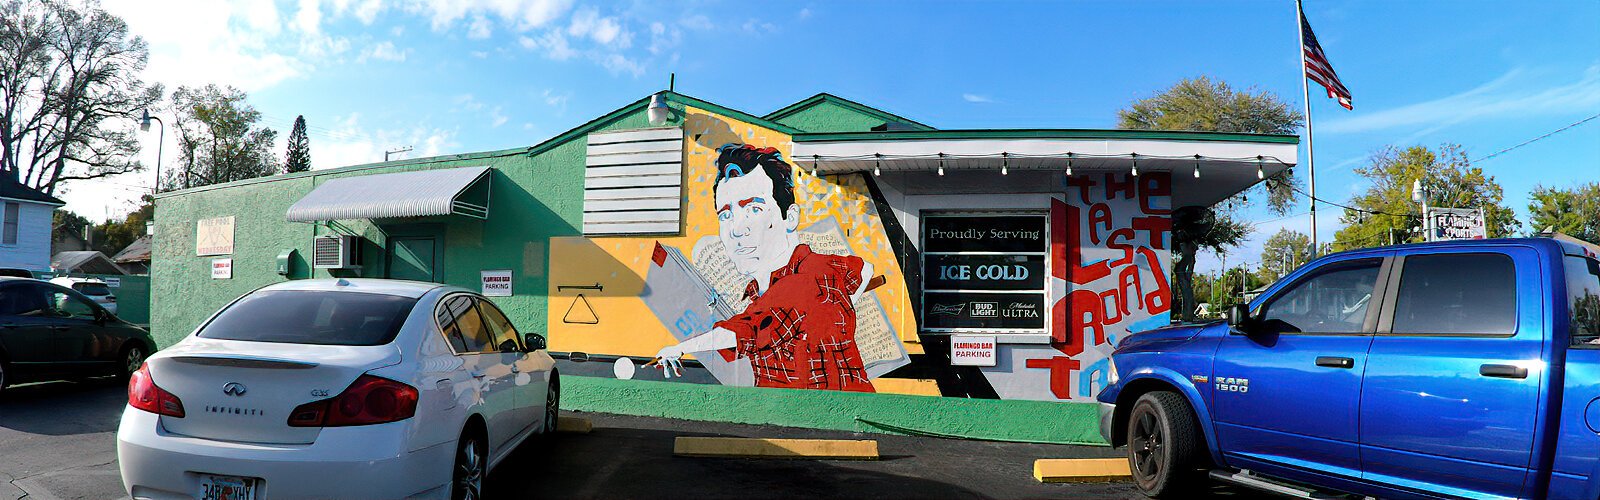  The Flamingo dive bar is supposedly the place where writer Jack Kerouac, featured on the mural, enjoyed his last drink before his death in 1969.